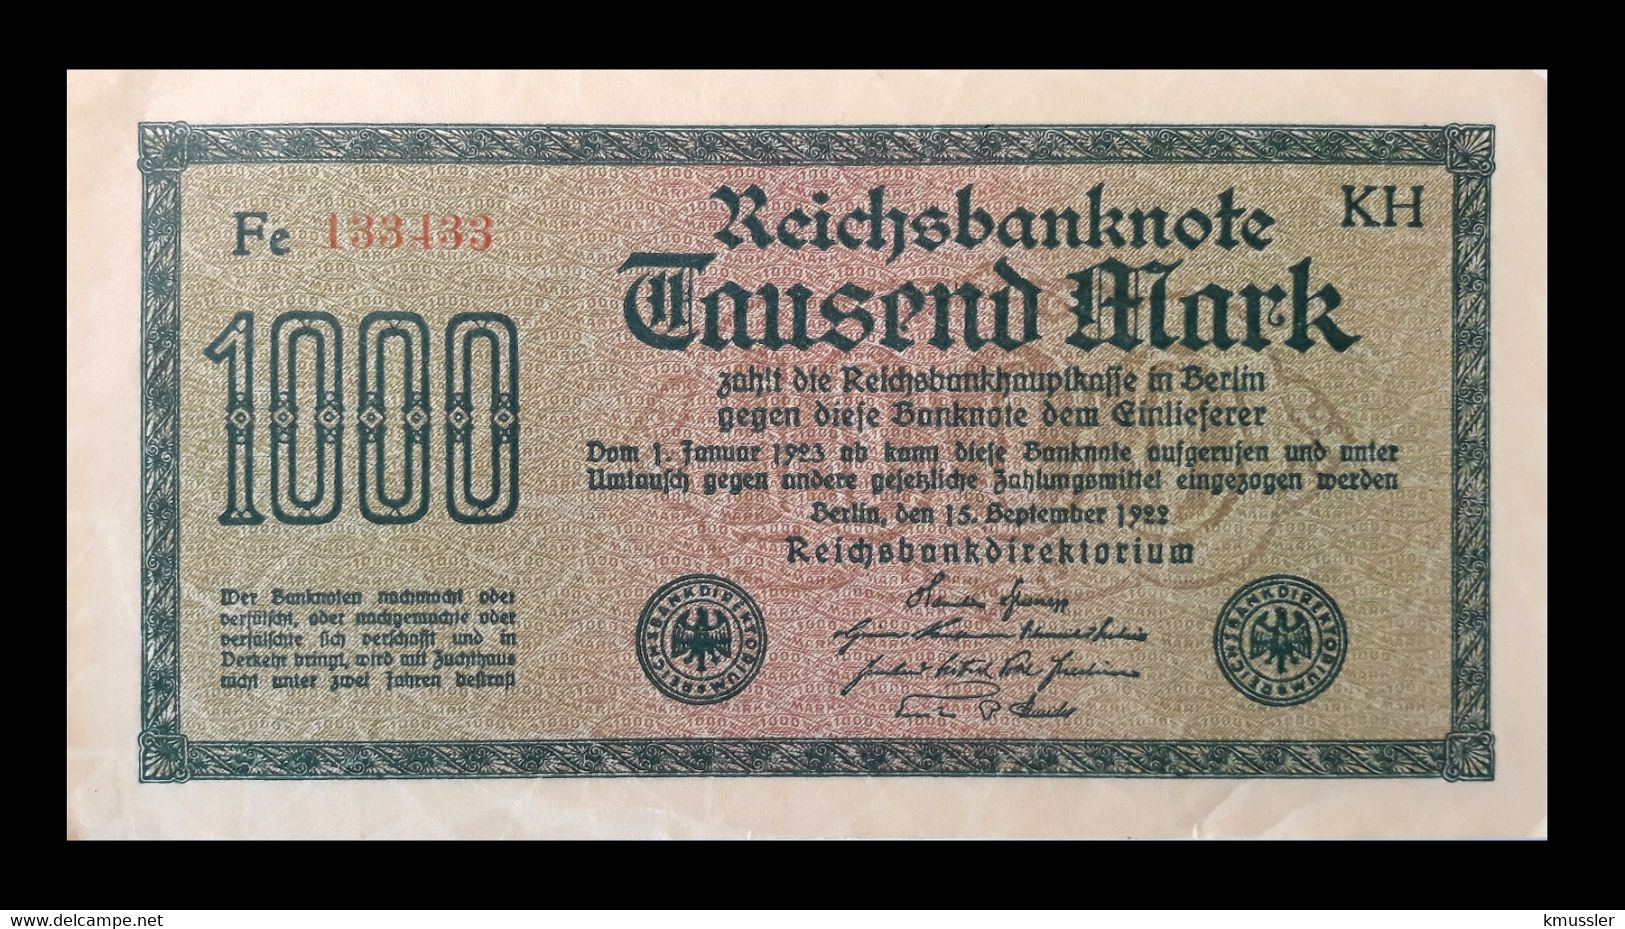 # # # Banknote Germany (Dt. Reich) 1.000 Mark 1922 UNC # # # - 1000 Mark